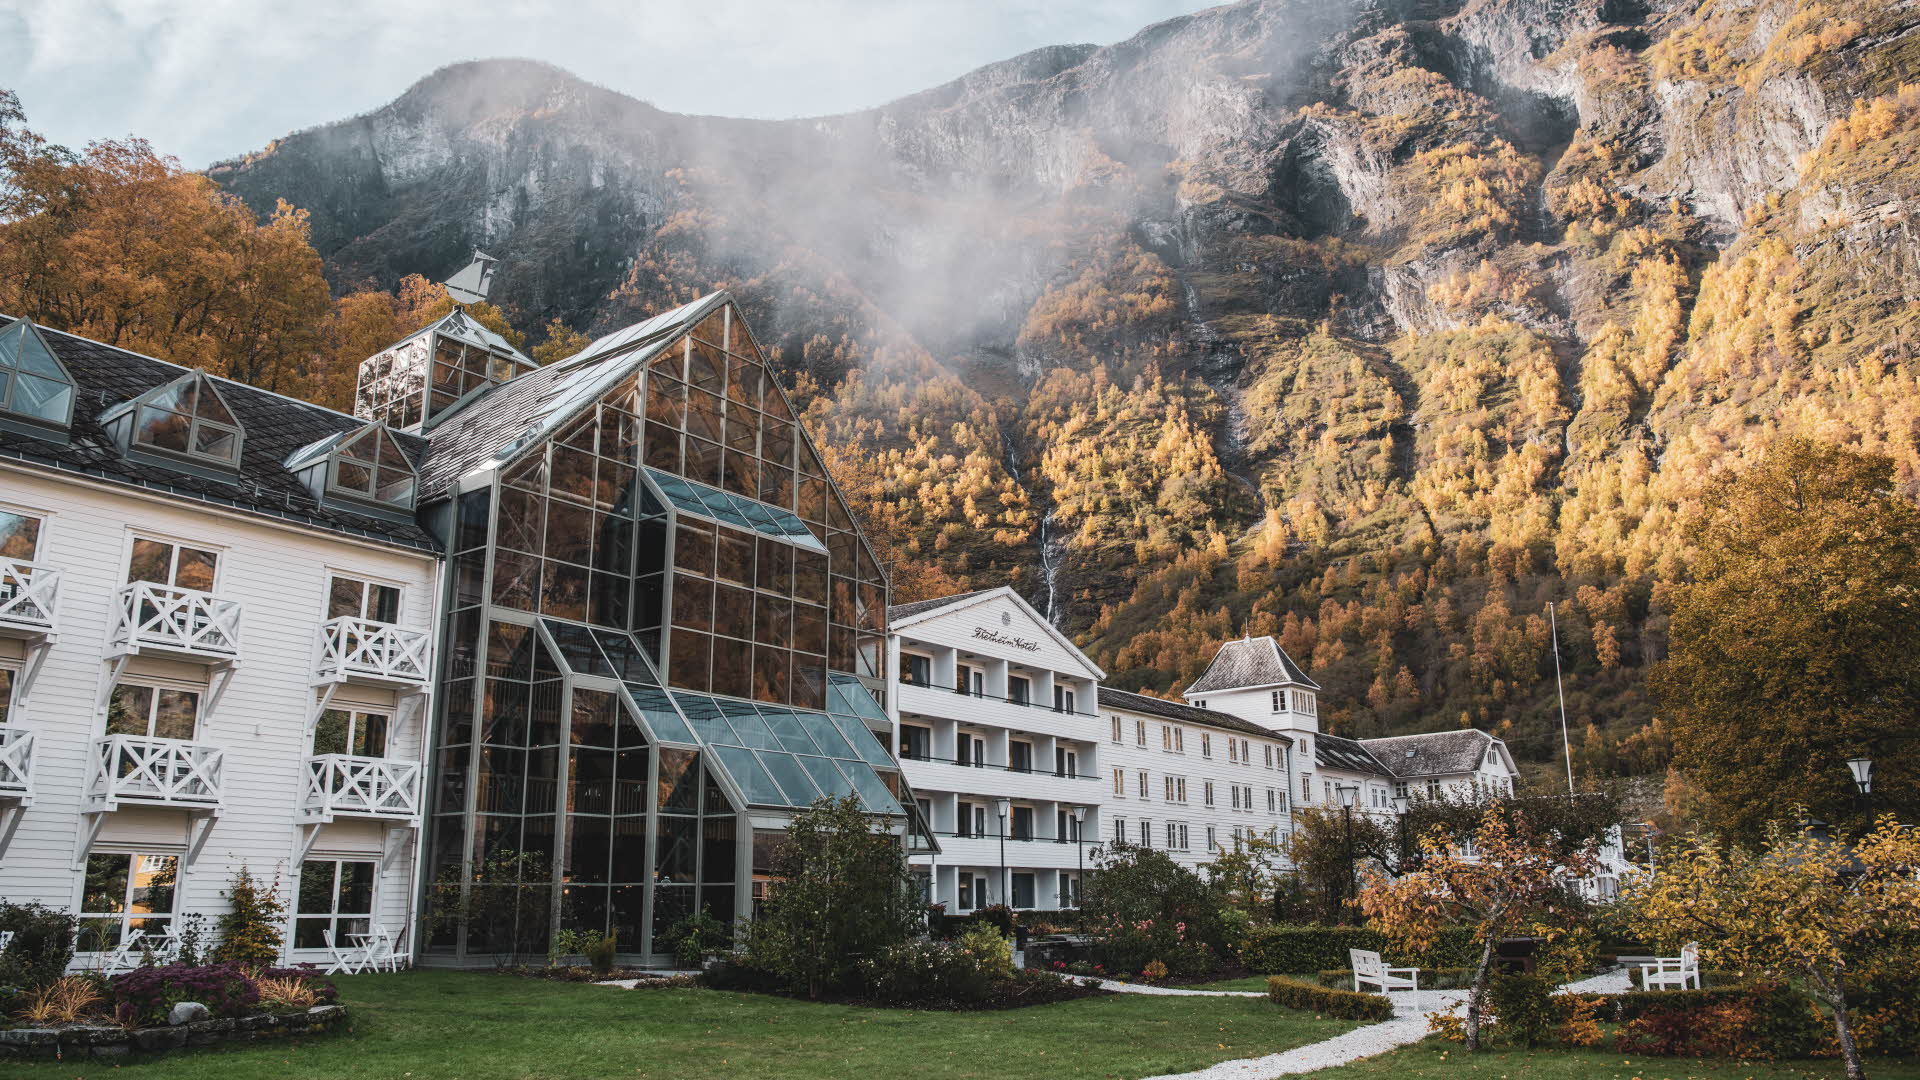 Exterior Fretheim Historical Hotel in Flam in autumn as sun shines on lush steep mountains in background